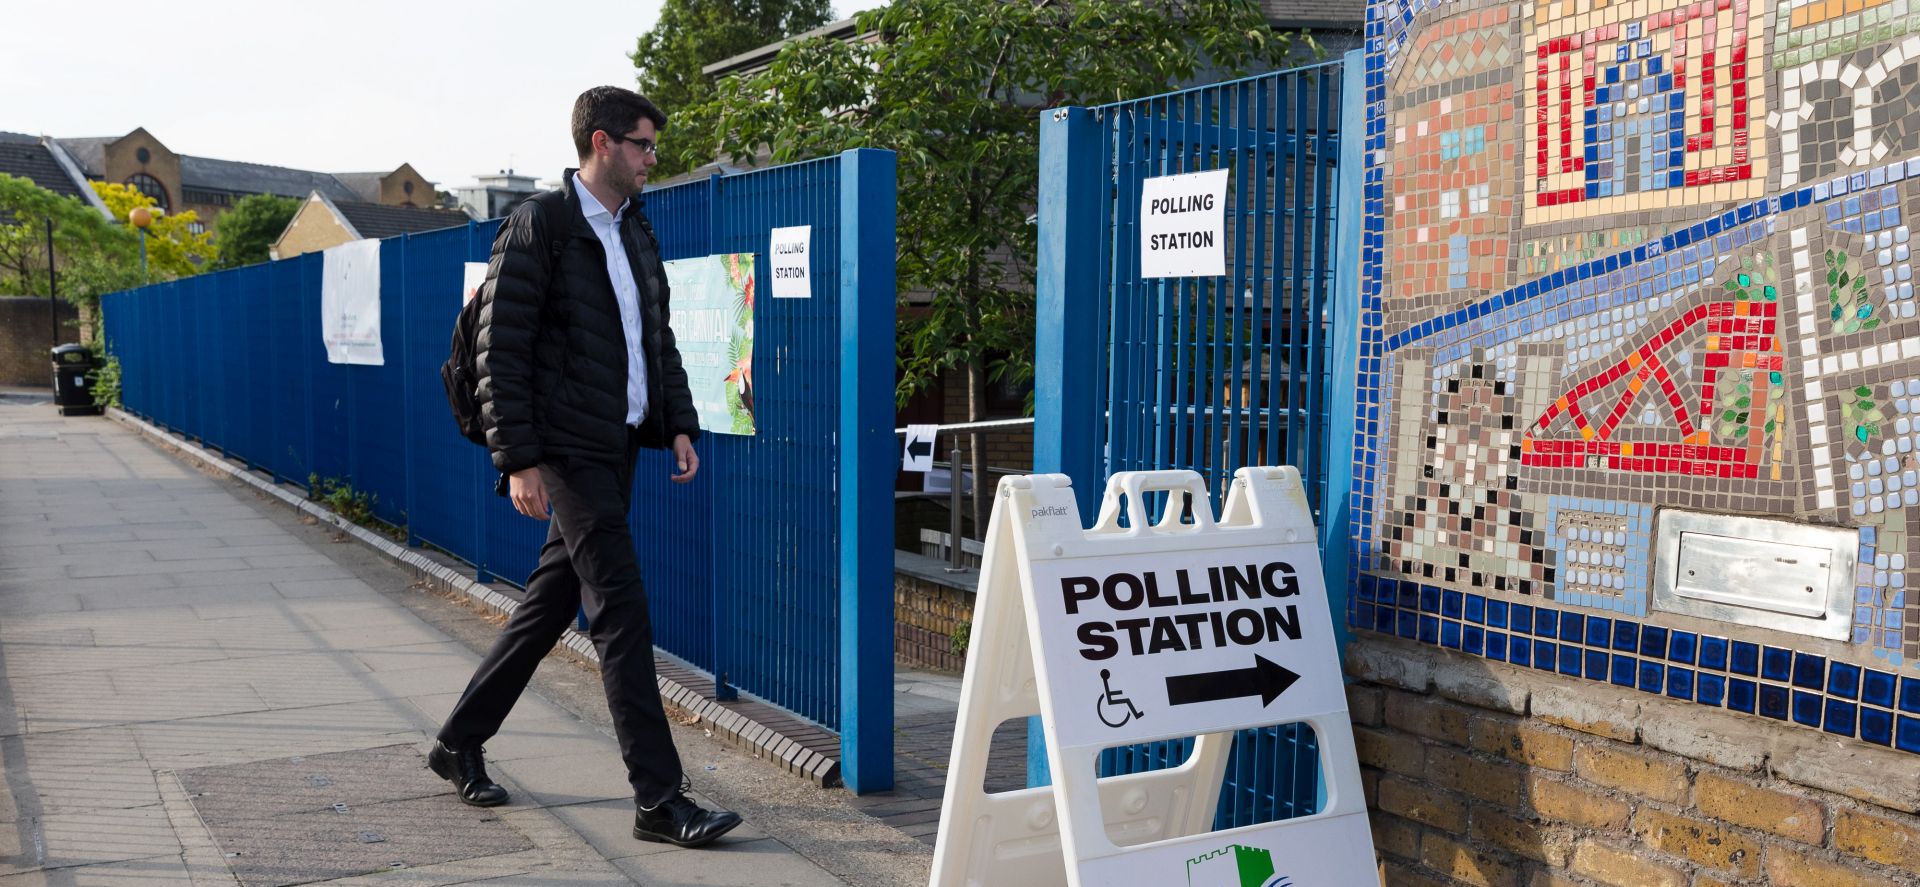 epa07593386 A voter arrives to cast their vote in the European Elections at a polling station in Tower Hamlets, London, Britain, 23 May 2019. The European Parliament election is held by member countries of the European Union (EU) from 23 to 26 May 2019.  EPA/VICKIE FLORES